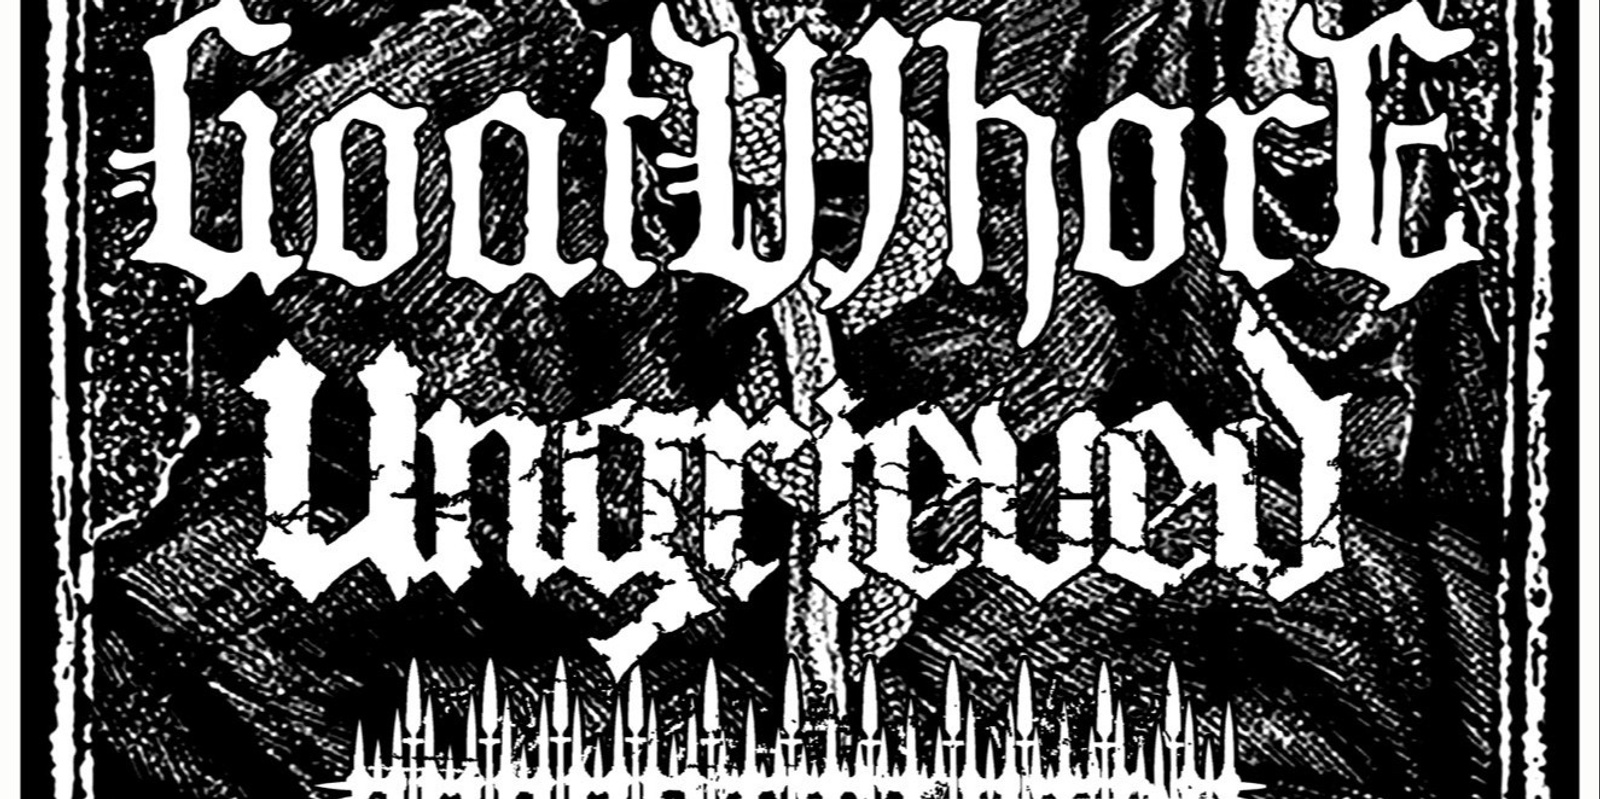 Banner image for Goatwhore, Ungrieved, Parasiticide